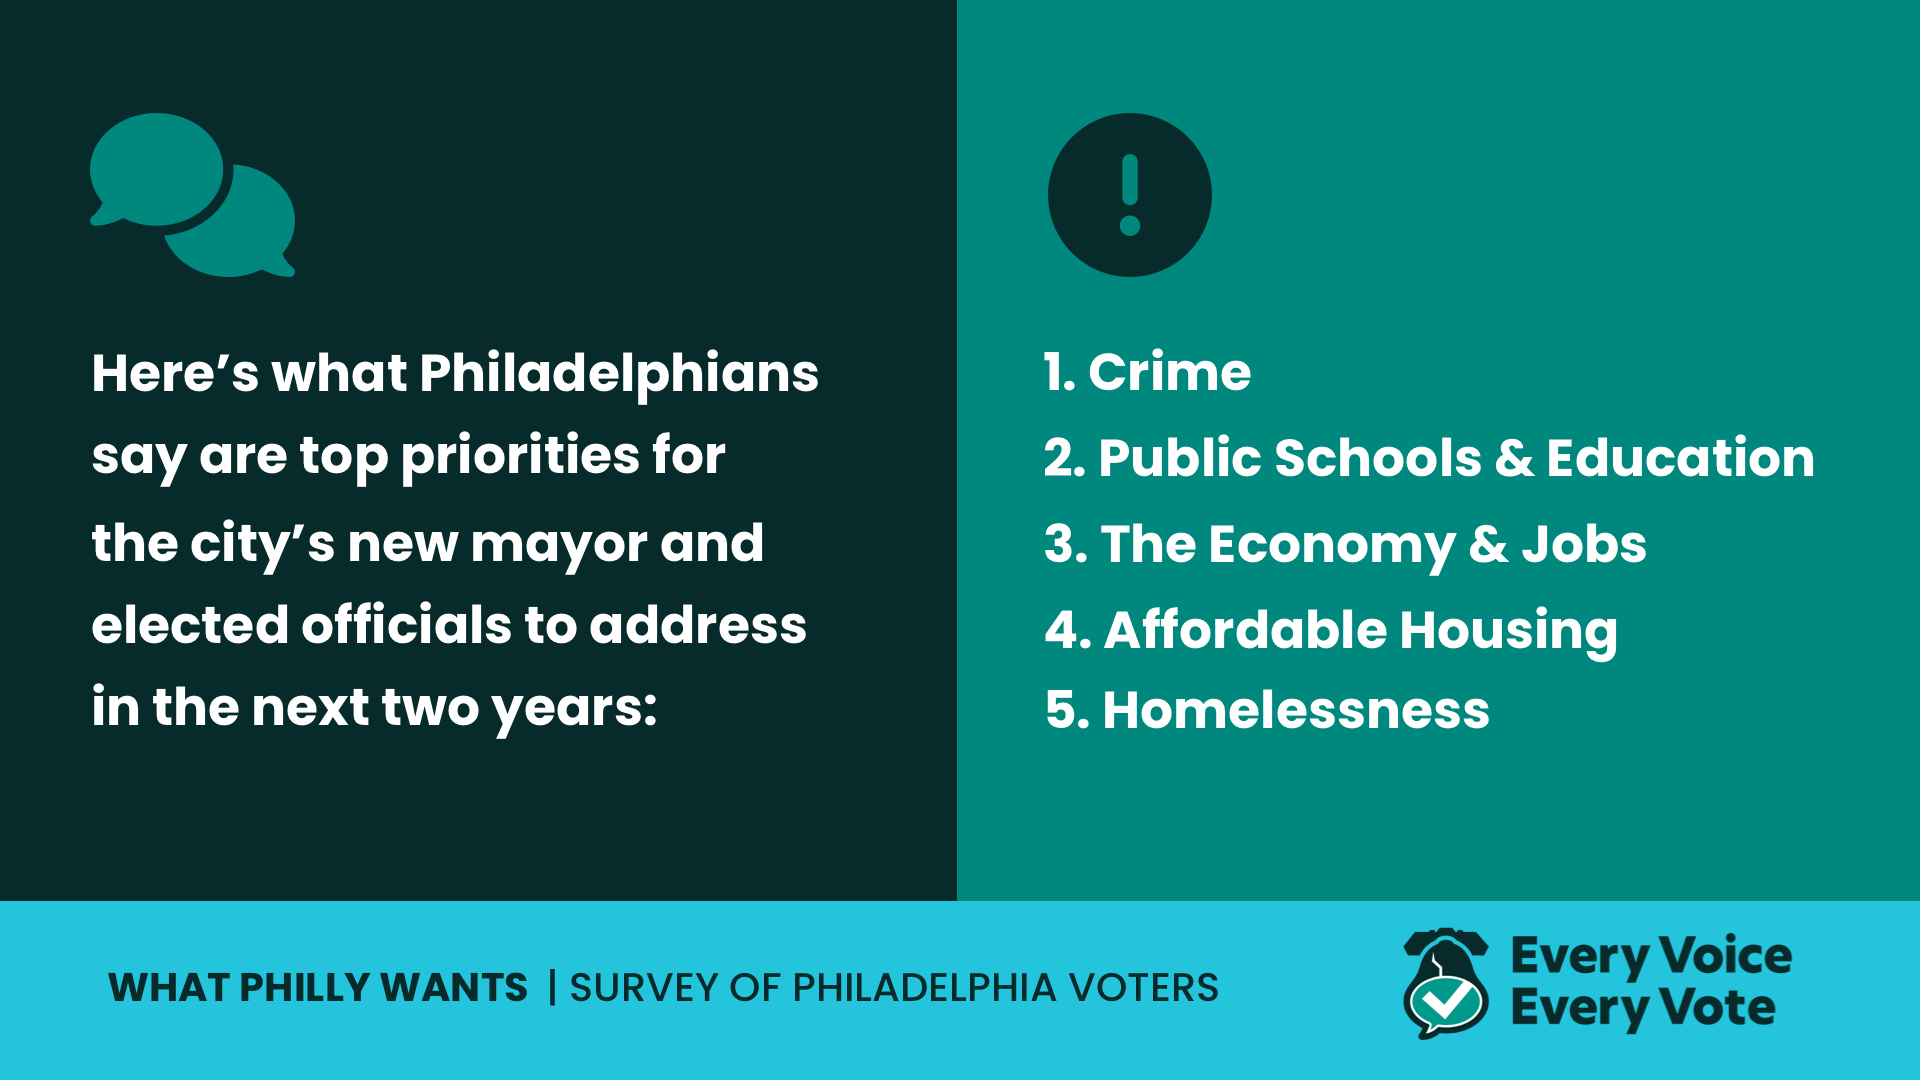 Infographic about what Philadelphians think are the top issues the mayor should address